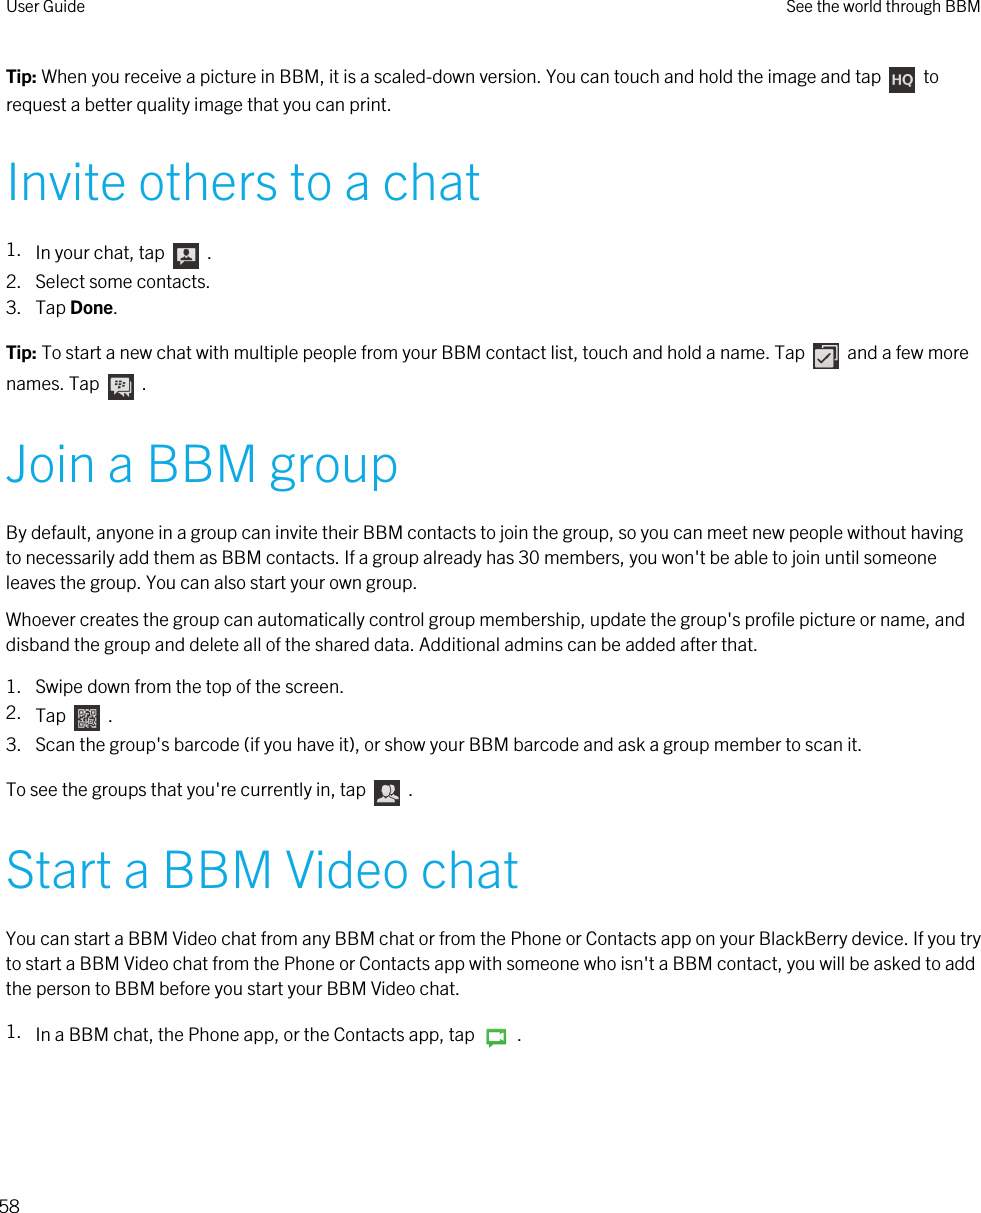 Tip: When you receive a picture in BBM, it is a scaled-down version. You can touch and hold the image and tap    to request a better quality image that you can print.Invite others to a chat1. In your chat, tap    . 2. Select some contacts.3. Tap Done.Tip: To start a new chat with multiple people from your BBM contact list, touch and hold a name. Tap    and a few more names. Tap    .Join a BBM groupBy default, anyone in a group can invite their BBM contacts to join the group, so you can meet new people without having to necessarily add them as BBM contacts. If a group already has 30 members, you won&apos;t be able to join until someone leaves the group. You can also start your own group.Whoever creates the group can automatically control group membership, update the group&apos;s profile picture or name, and disband the group and delete all of the shared data. Additional admins can be added after that.1. Swipe down from the top of the screen.2. Tap    .3. Scan the group&apos;s barcode (if you have it), or show your BBM barcode and ask a group member to scan it.To see the groups that you&apos;re currently in, tap    .Start a BBM Video chatYou can start a BBM Video chat from any BBM chat or from the Phone or Contacts app on your BlackBerry device. If you try to start a BBM Video chat from the Phone or Contacts app with someone who isn&apos;t a BBM contact, you will be asked to add the person to BBM before you start your BBM Video chat.1. In a BBM chat, the Phone app, or the Contacts app, tap    .User Guide See the world through BBM58 